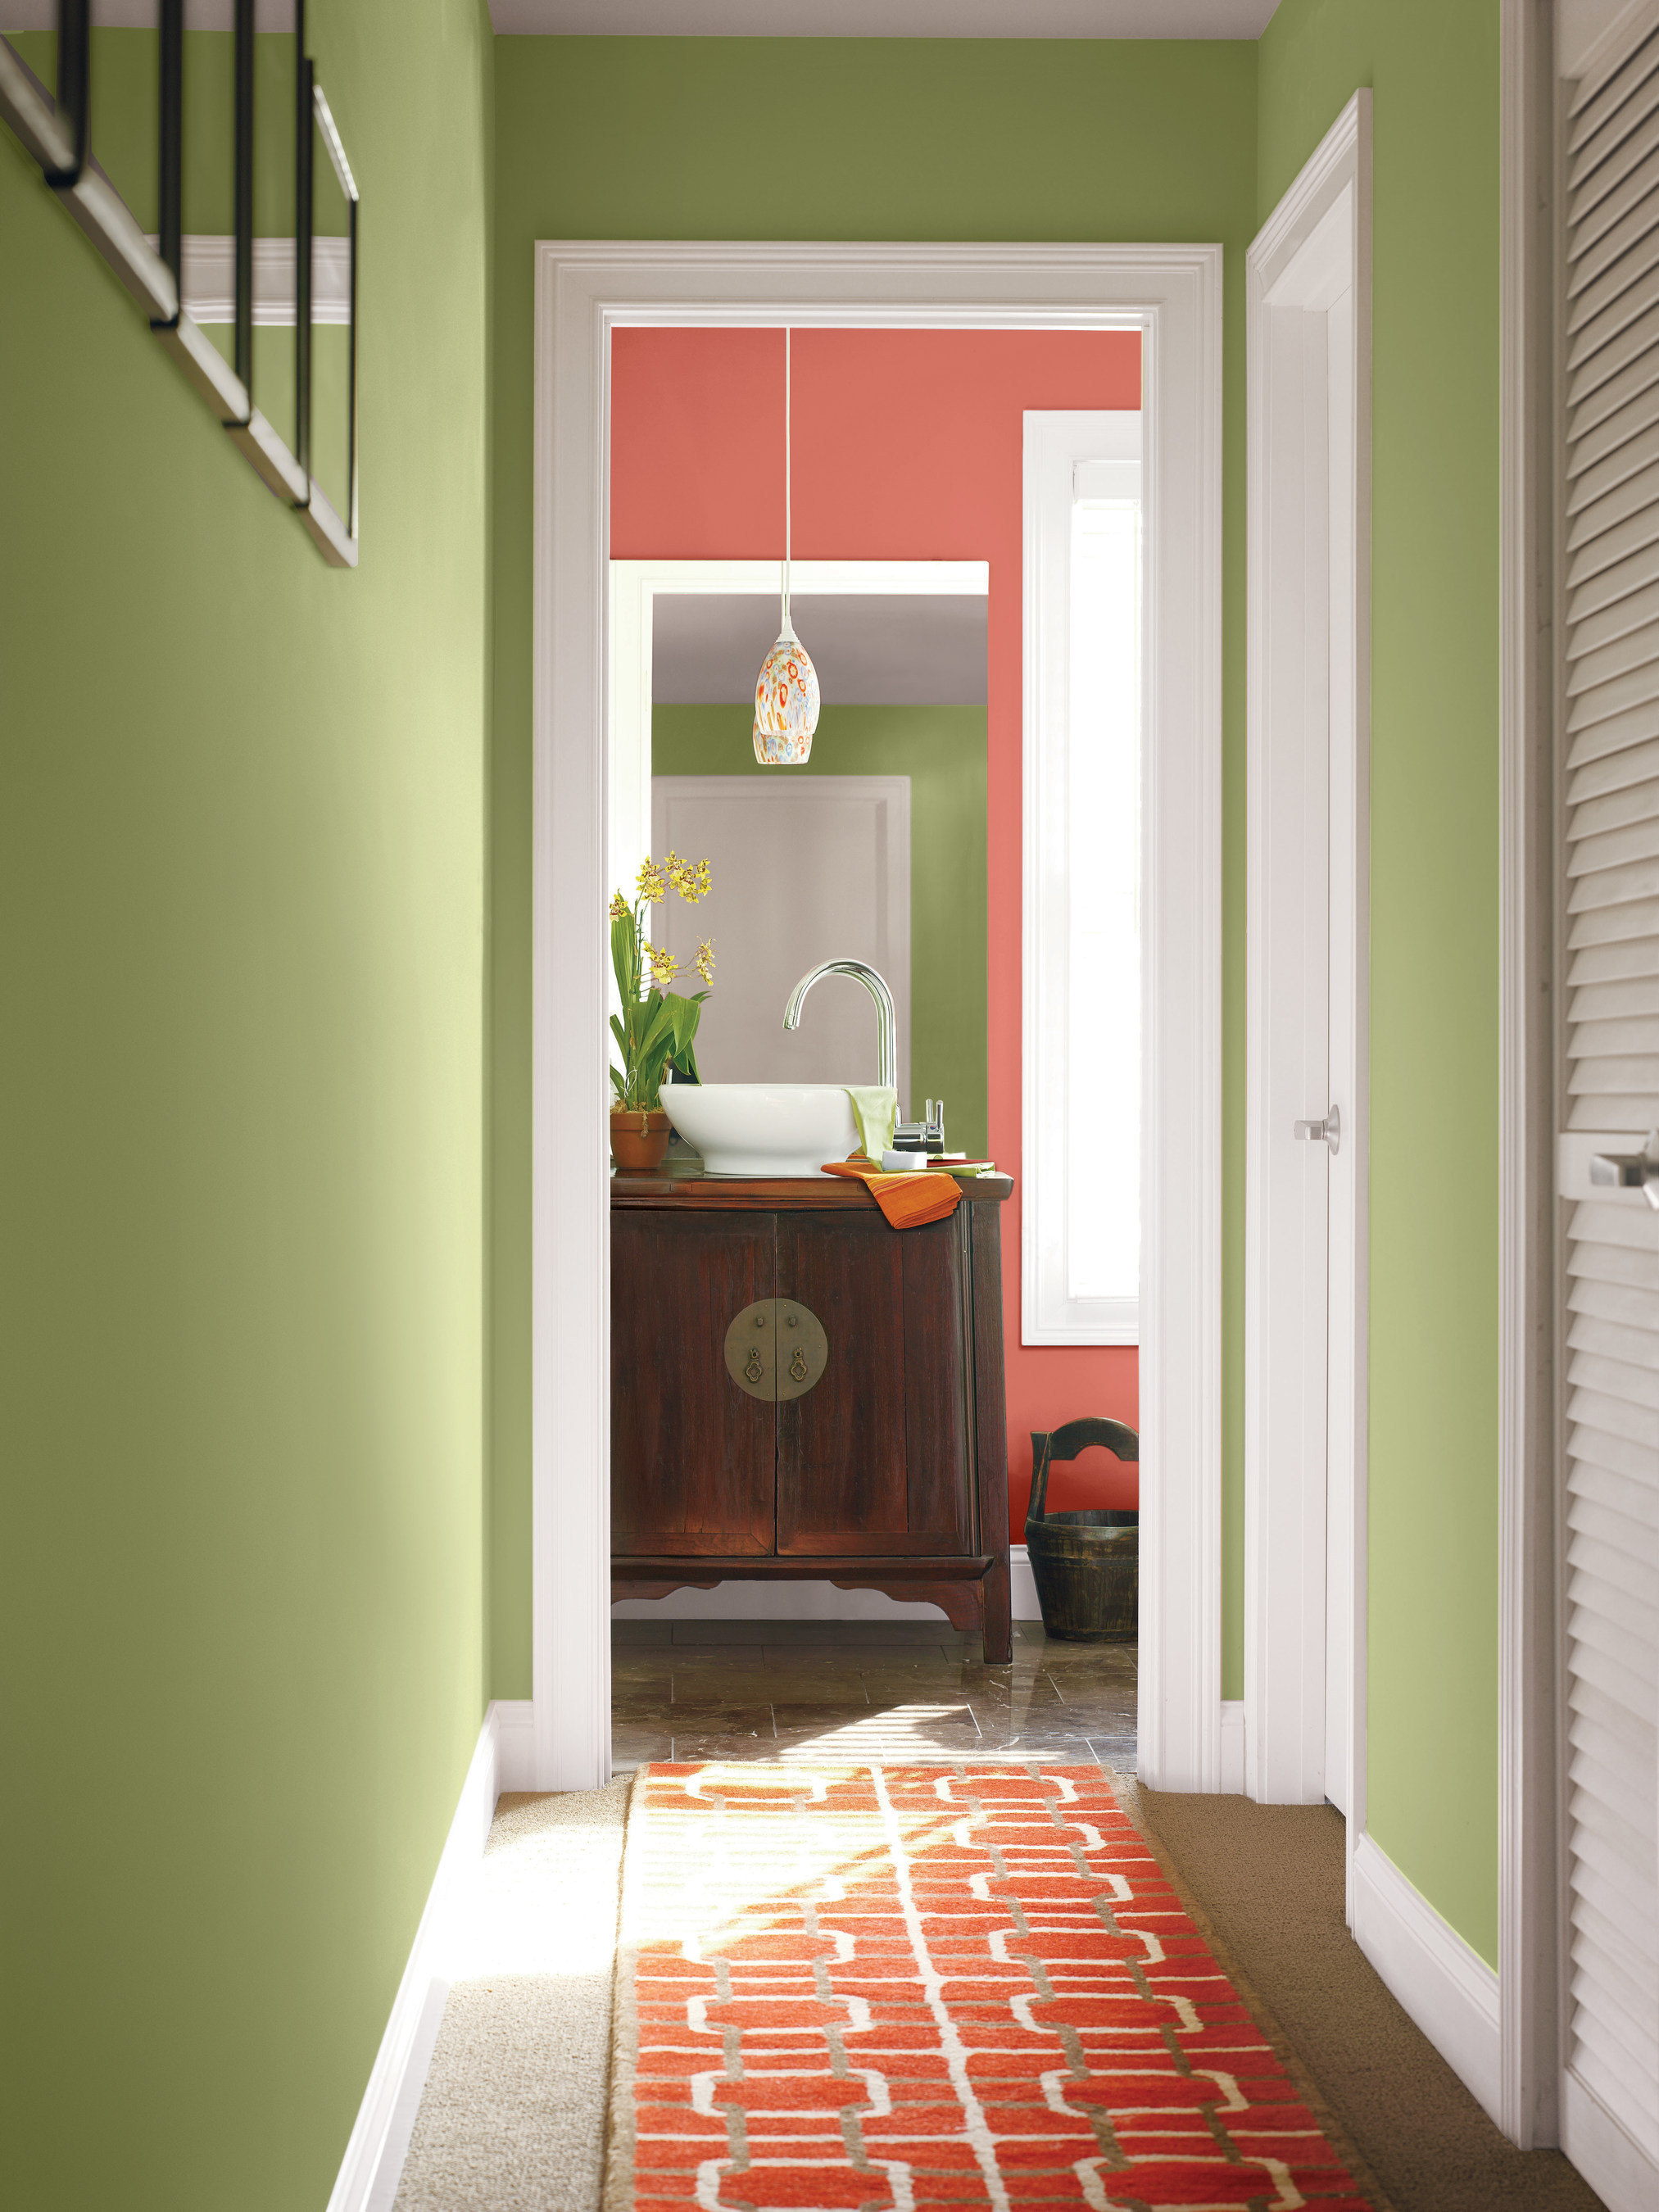 Sherwin-Williams Color of the Year 2015 Coral Reef (SW 6606) is an uplifting, vivacious hue with floral notes that can be used to liven up any space.